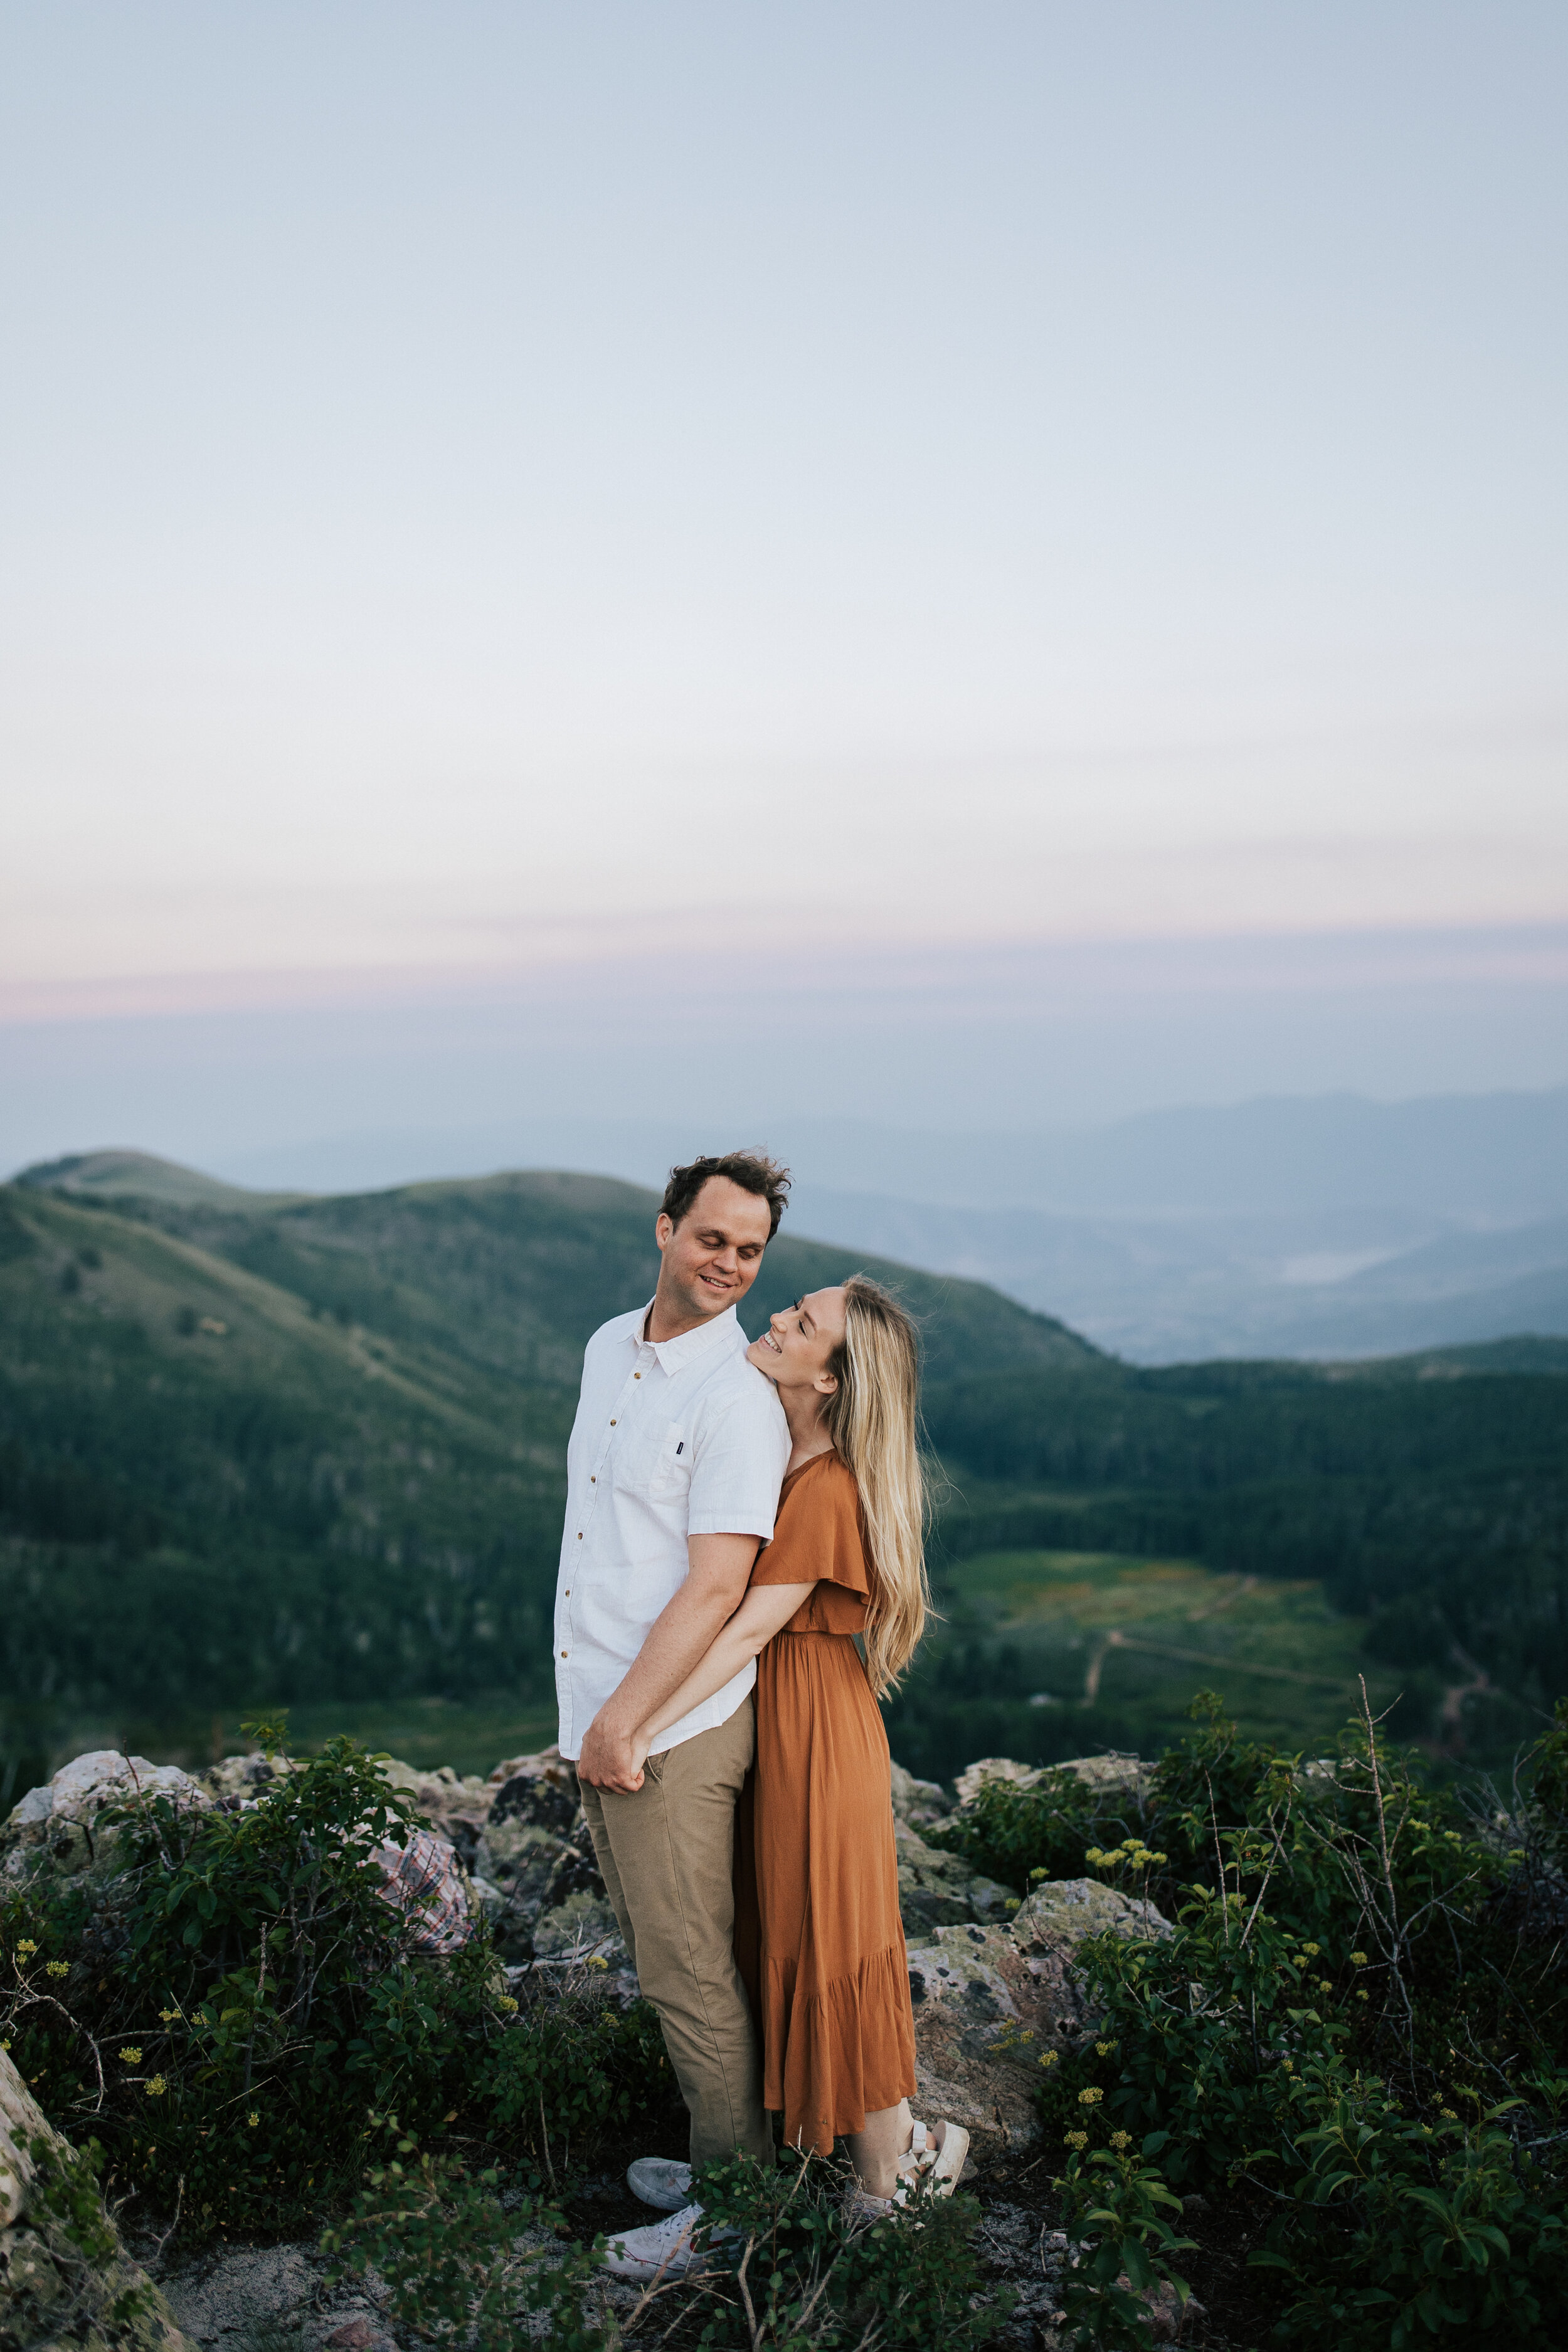  Engagement session in wildflowers in the mountains near Park City, Utah. Summertime engagement photos with mountain views. Engaged couple doing a piggyback ride in the mountains. Outfit inspo. Engagement outfits. Rocky mountain cliffs with pine tree